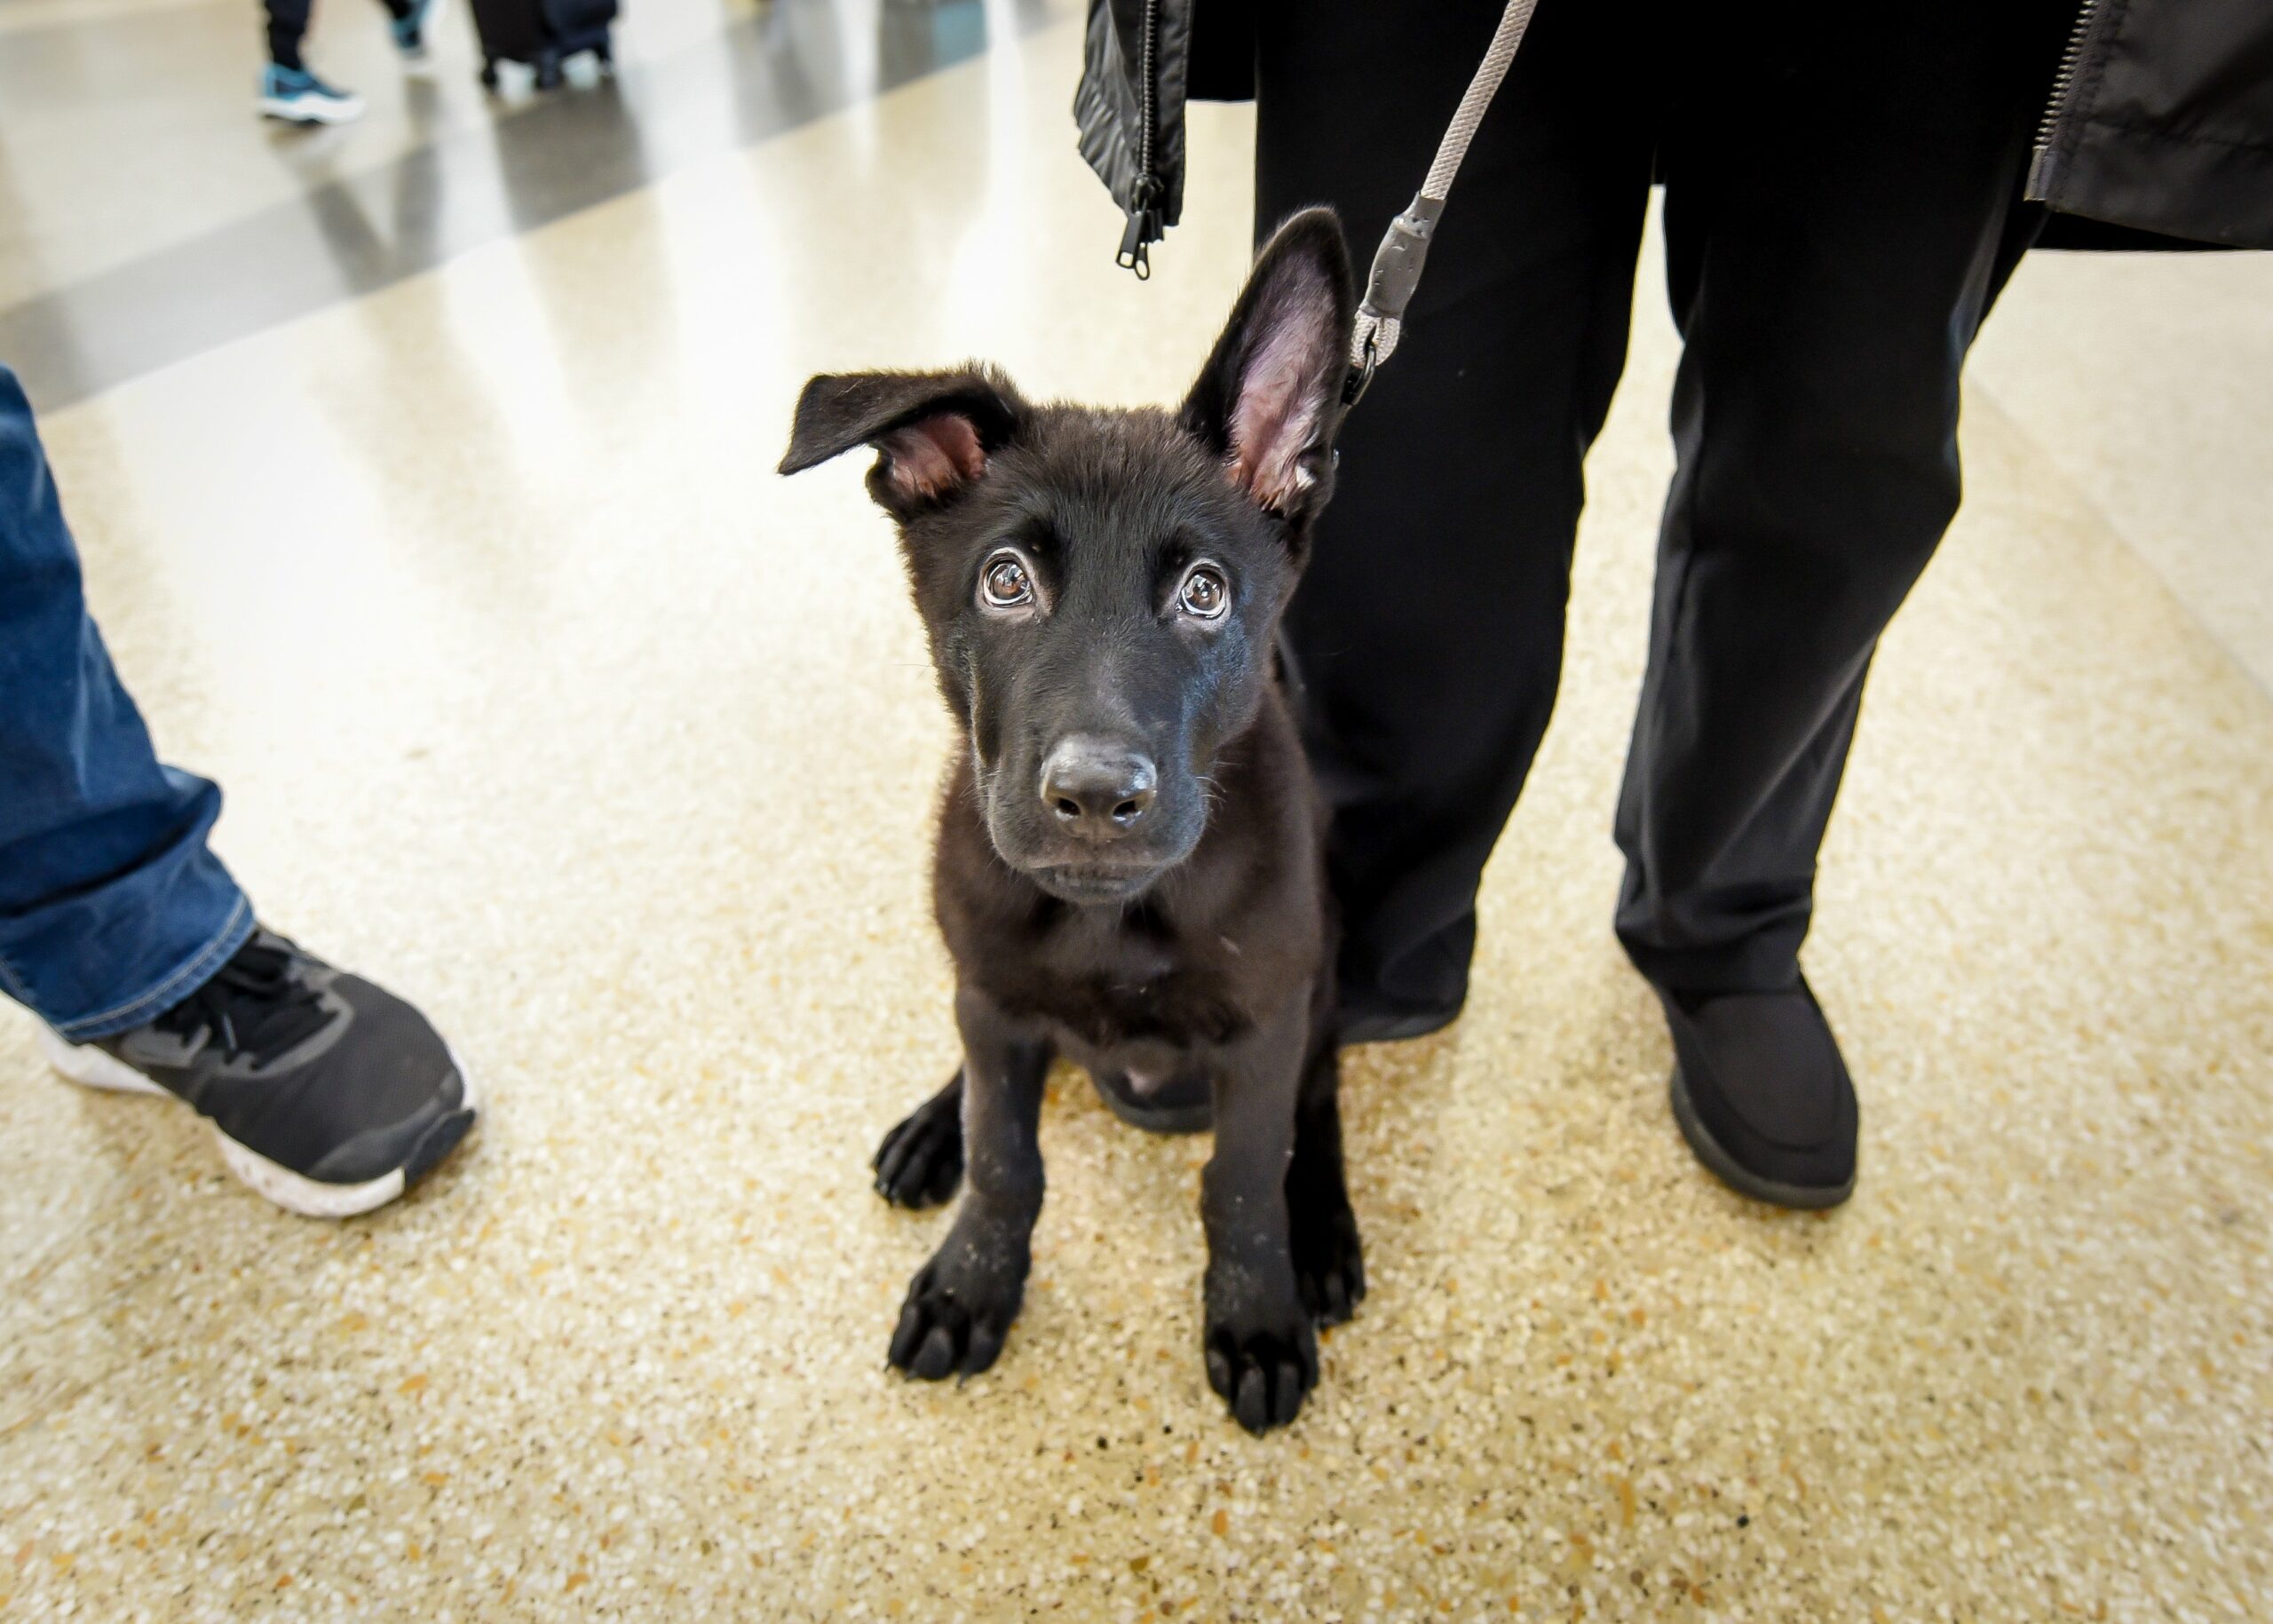 Polaris the puppy, a black dog with one floppy ear and one ear standing up.